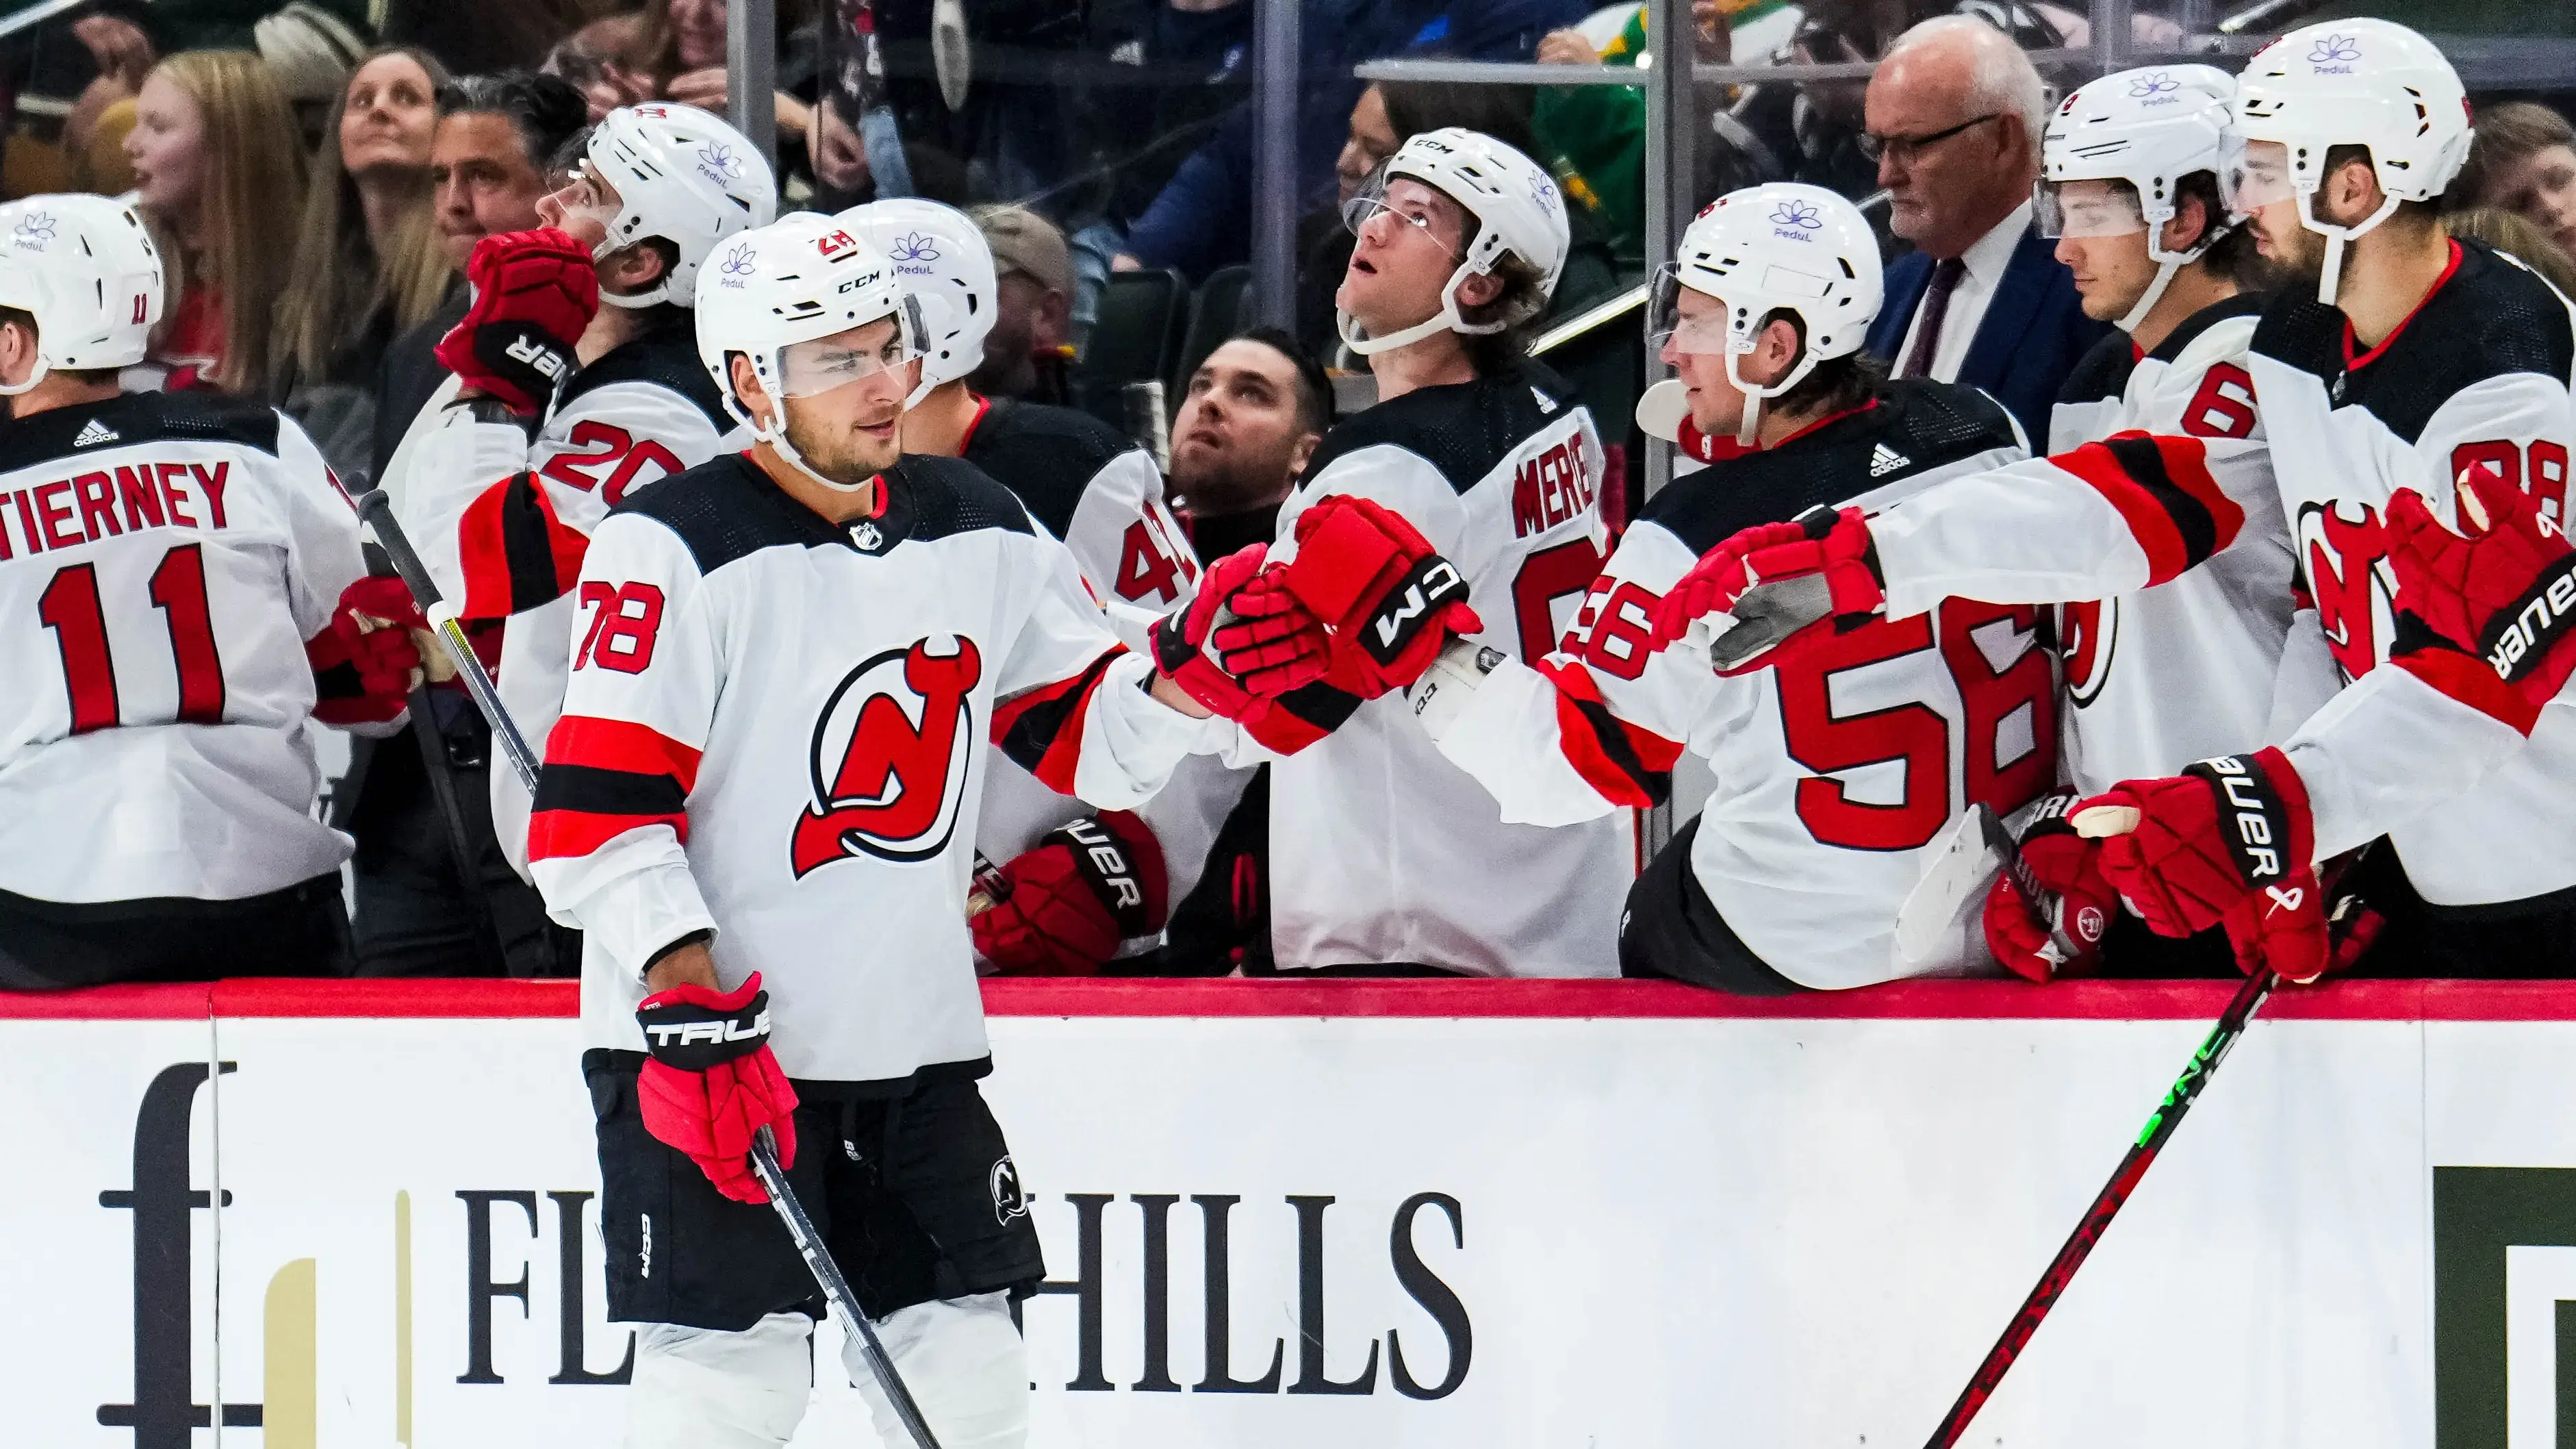 New Jersey Devils right wing Timo Meier (28) celebrates his goal with teammates during the second period against the Minnesota Wild at Xcel Energy Center / Brace Hemmelgarn - USA TODAY Sports